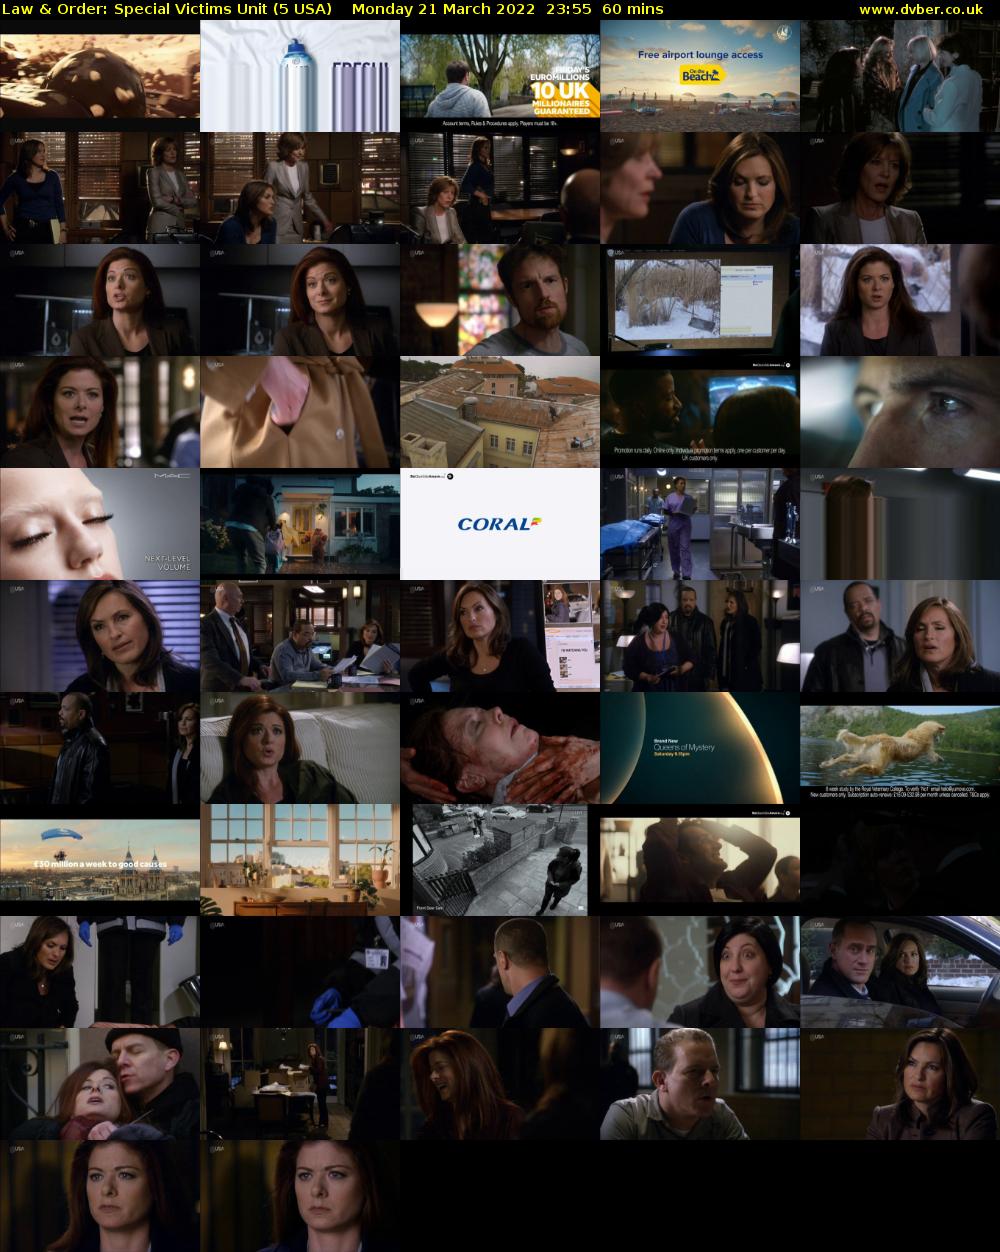 Law & Order: Special Victims Unit (5 USA) Monday 21 March 2022 23:55 - 00:55